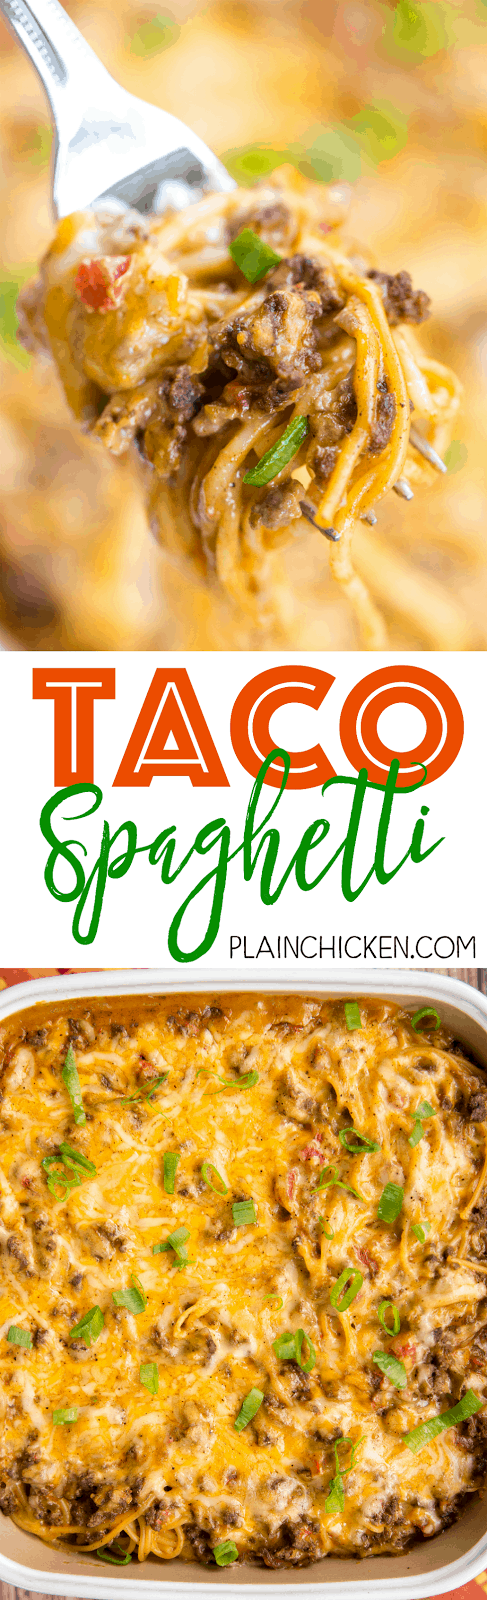 Taco Spaghetti - THE BEST! We ate this three days in a row! Ready in 30 minutes!! Taco meat, velveeta, diced tomatoes with green chilies, spaghetti, cream of chicken soup and cheddar cheese. CRAZY good! Everyone cleaned their plates - even our picky eaters! Our favorite Mexican casserole!